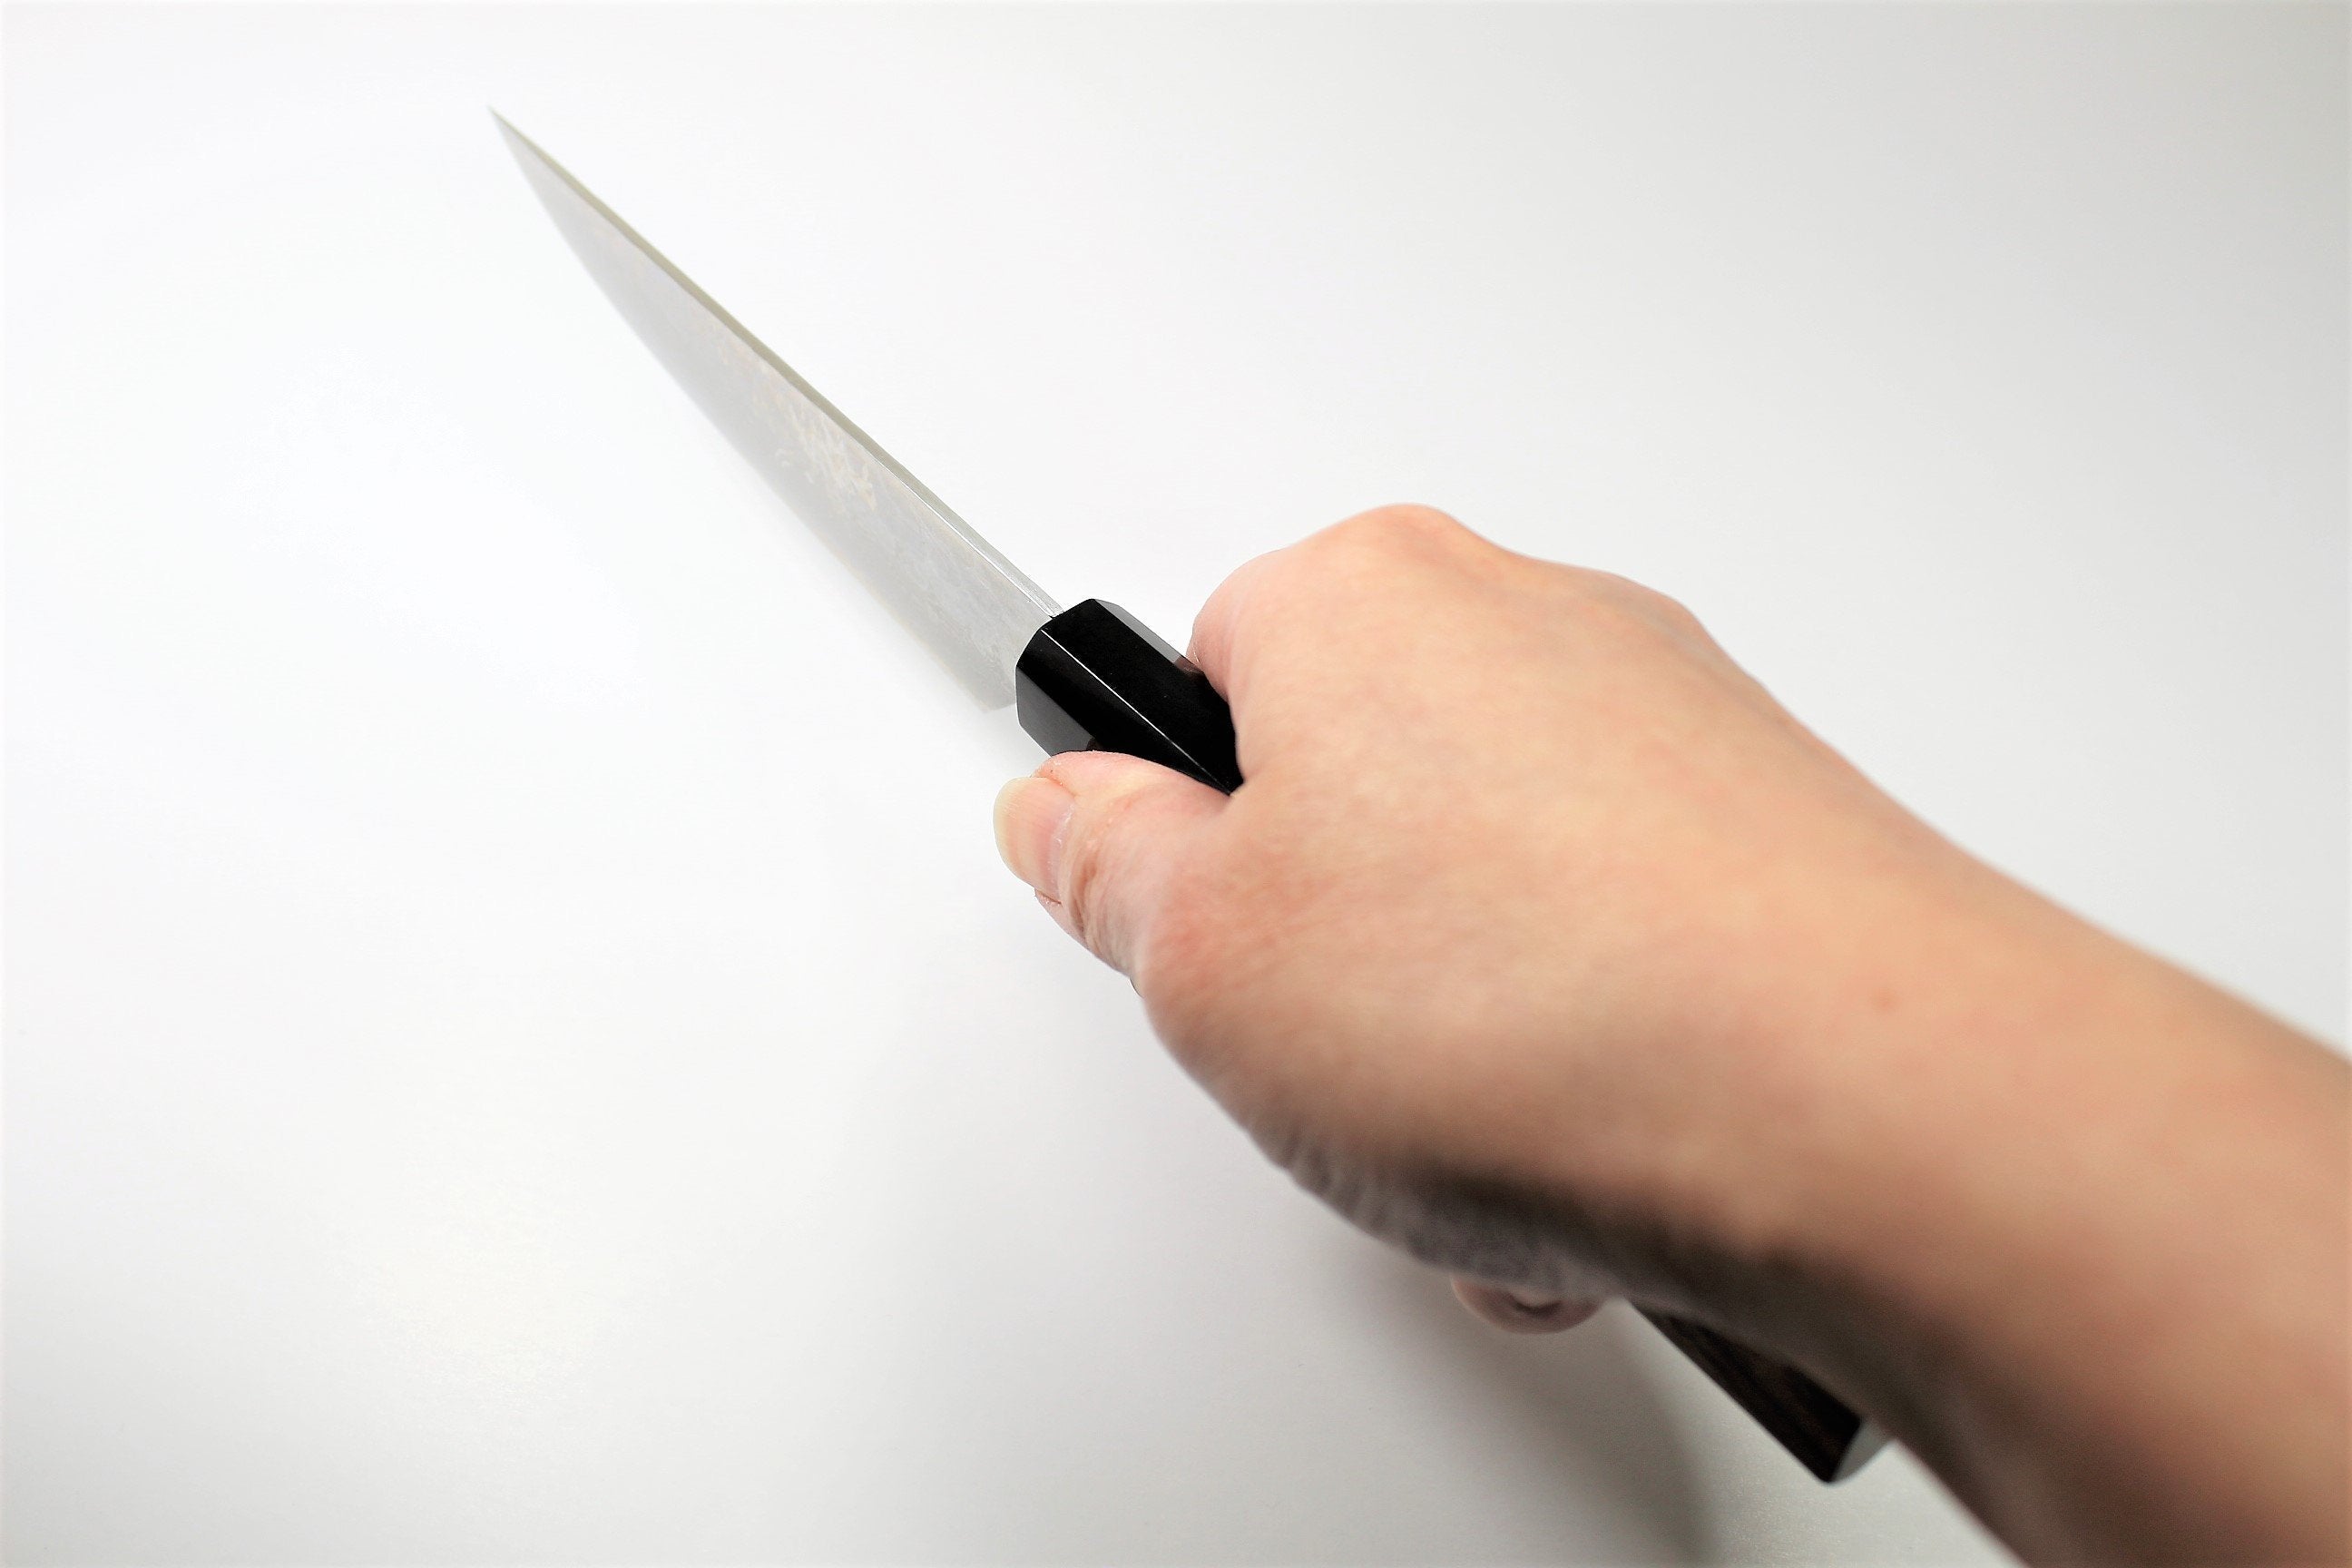 KYOCERA > A best-seller the 3 paring knife has a non-beveled, ultra-sharp ceramic  blade.